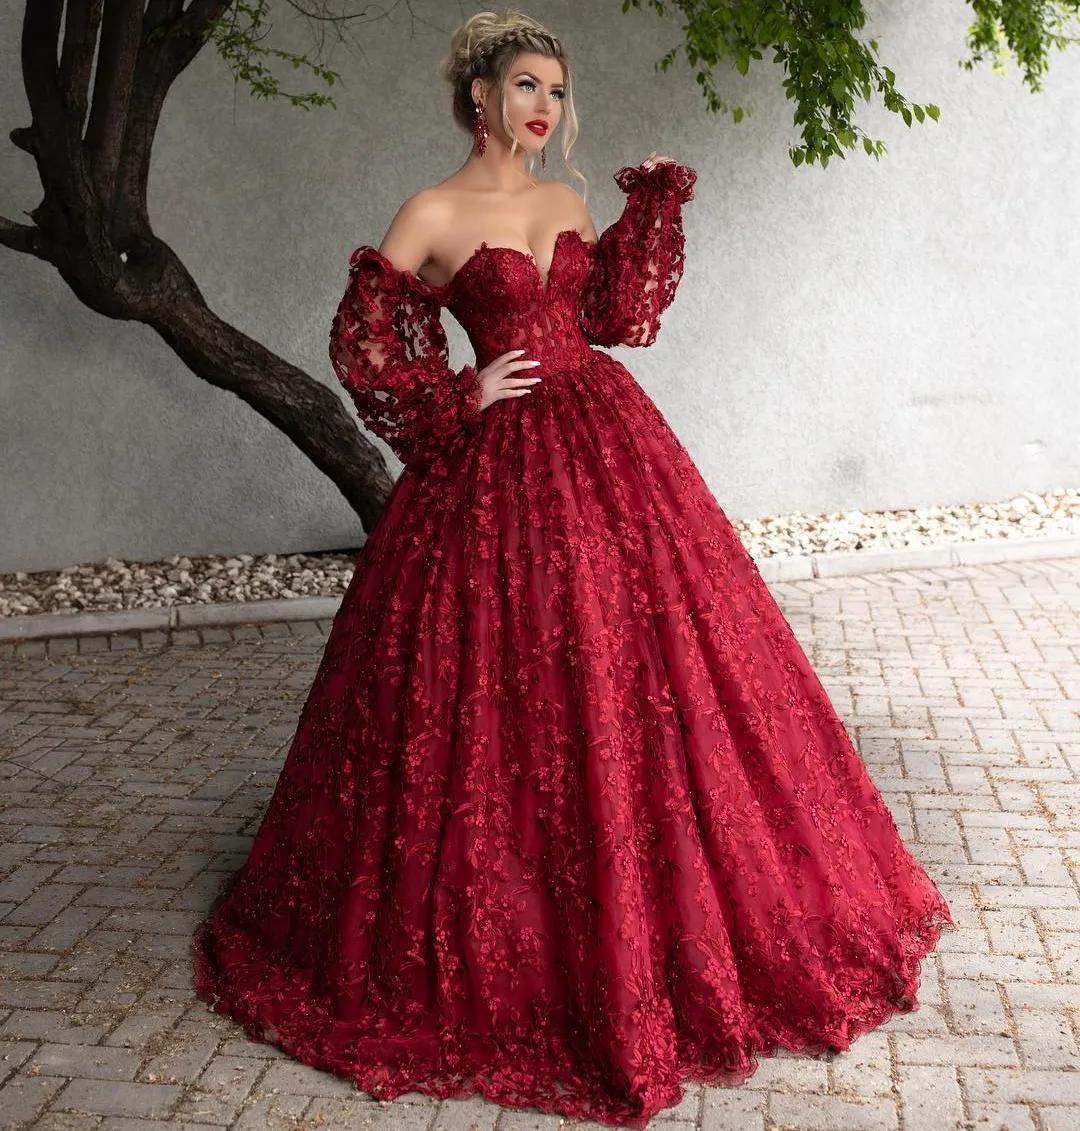 Dark Red Mermaid Maroon Prom Dresses 2022 With Long Sleeves, Lace Beads,  And Deep V Neckline 2020 New Arrival From Hxhdress, $132.97 | DHgate.Com